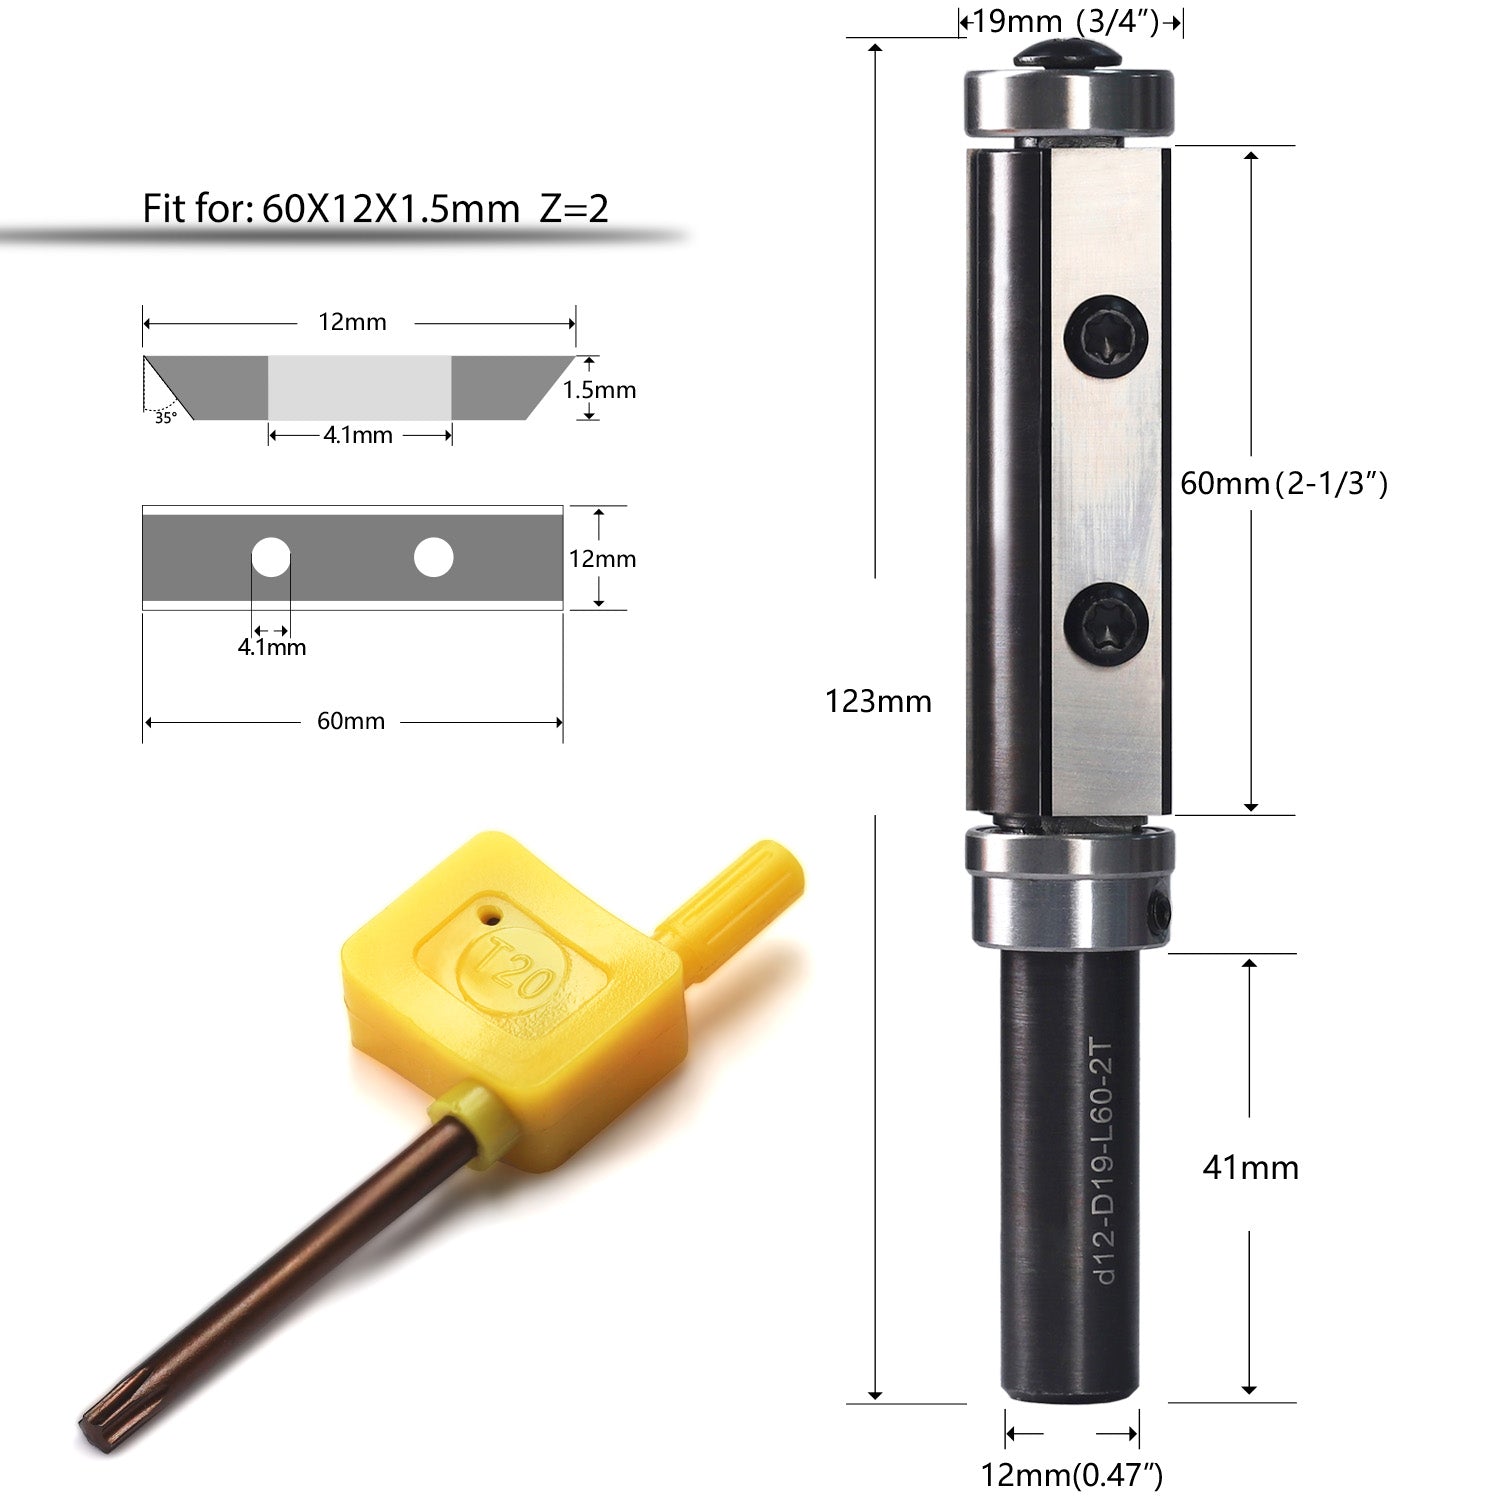 yeptooling double bearing flush trim router bit milling cutter for woodworking trimming, 12 mm shank diameter,  19 mm cutting diameter,  60 mm cutting length, 123 mm overall length 